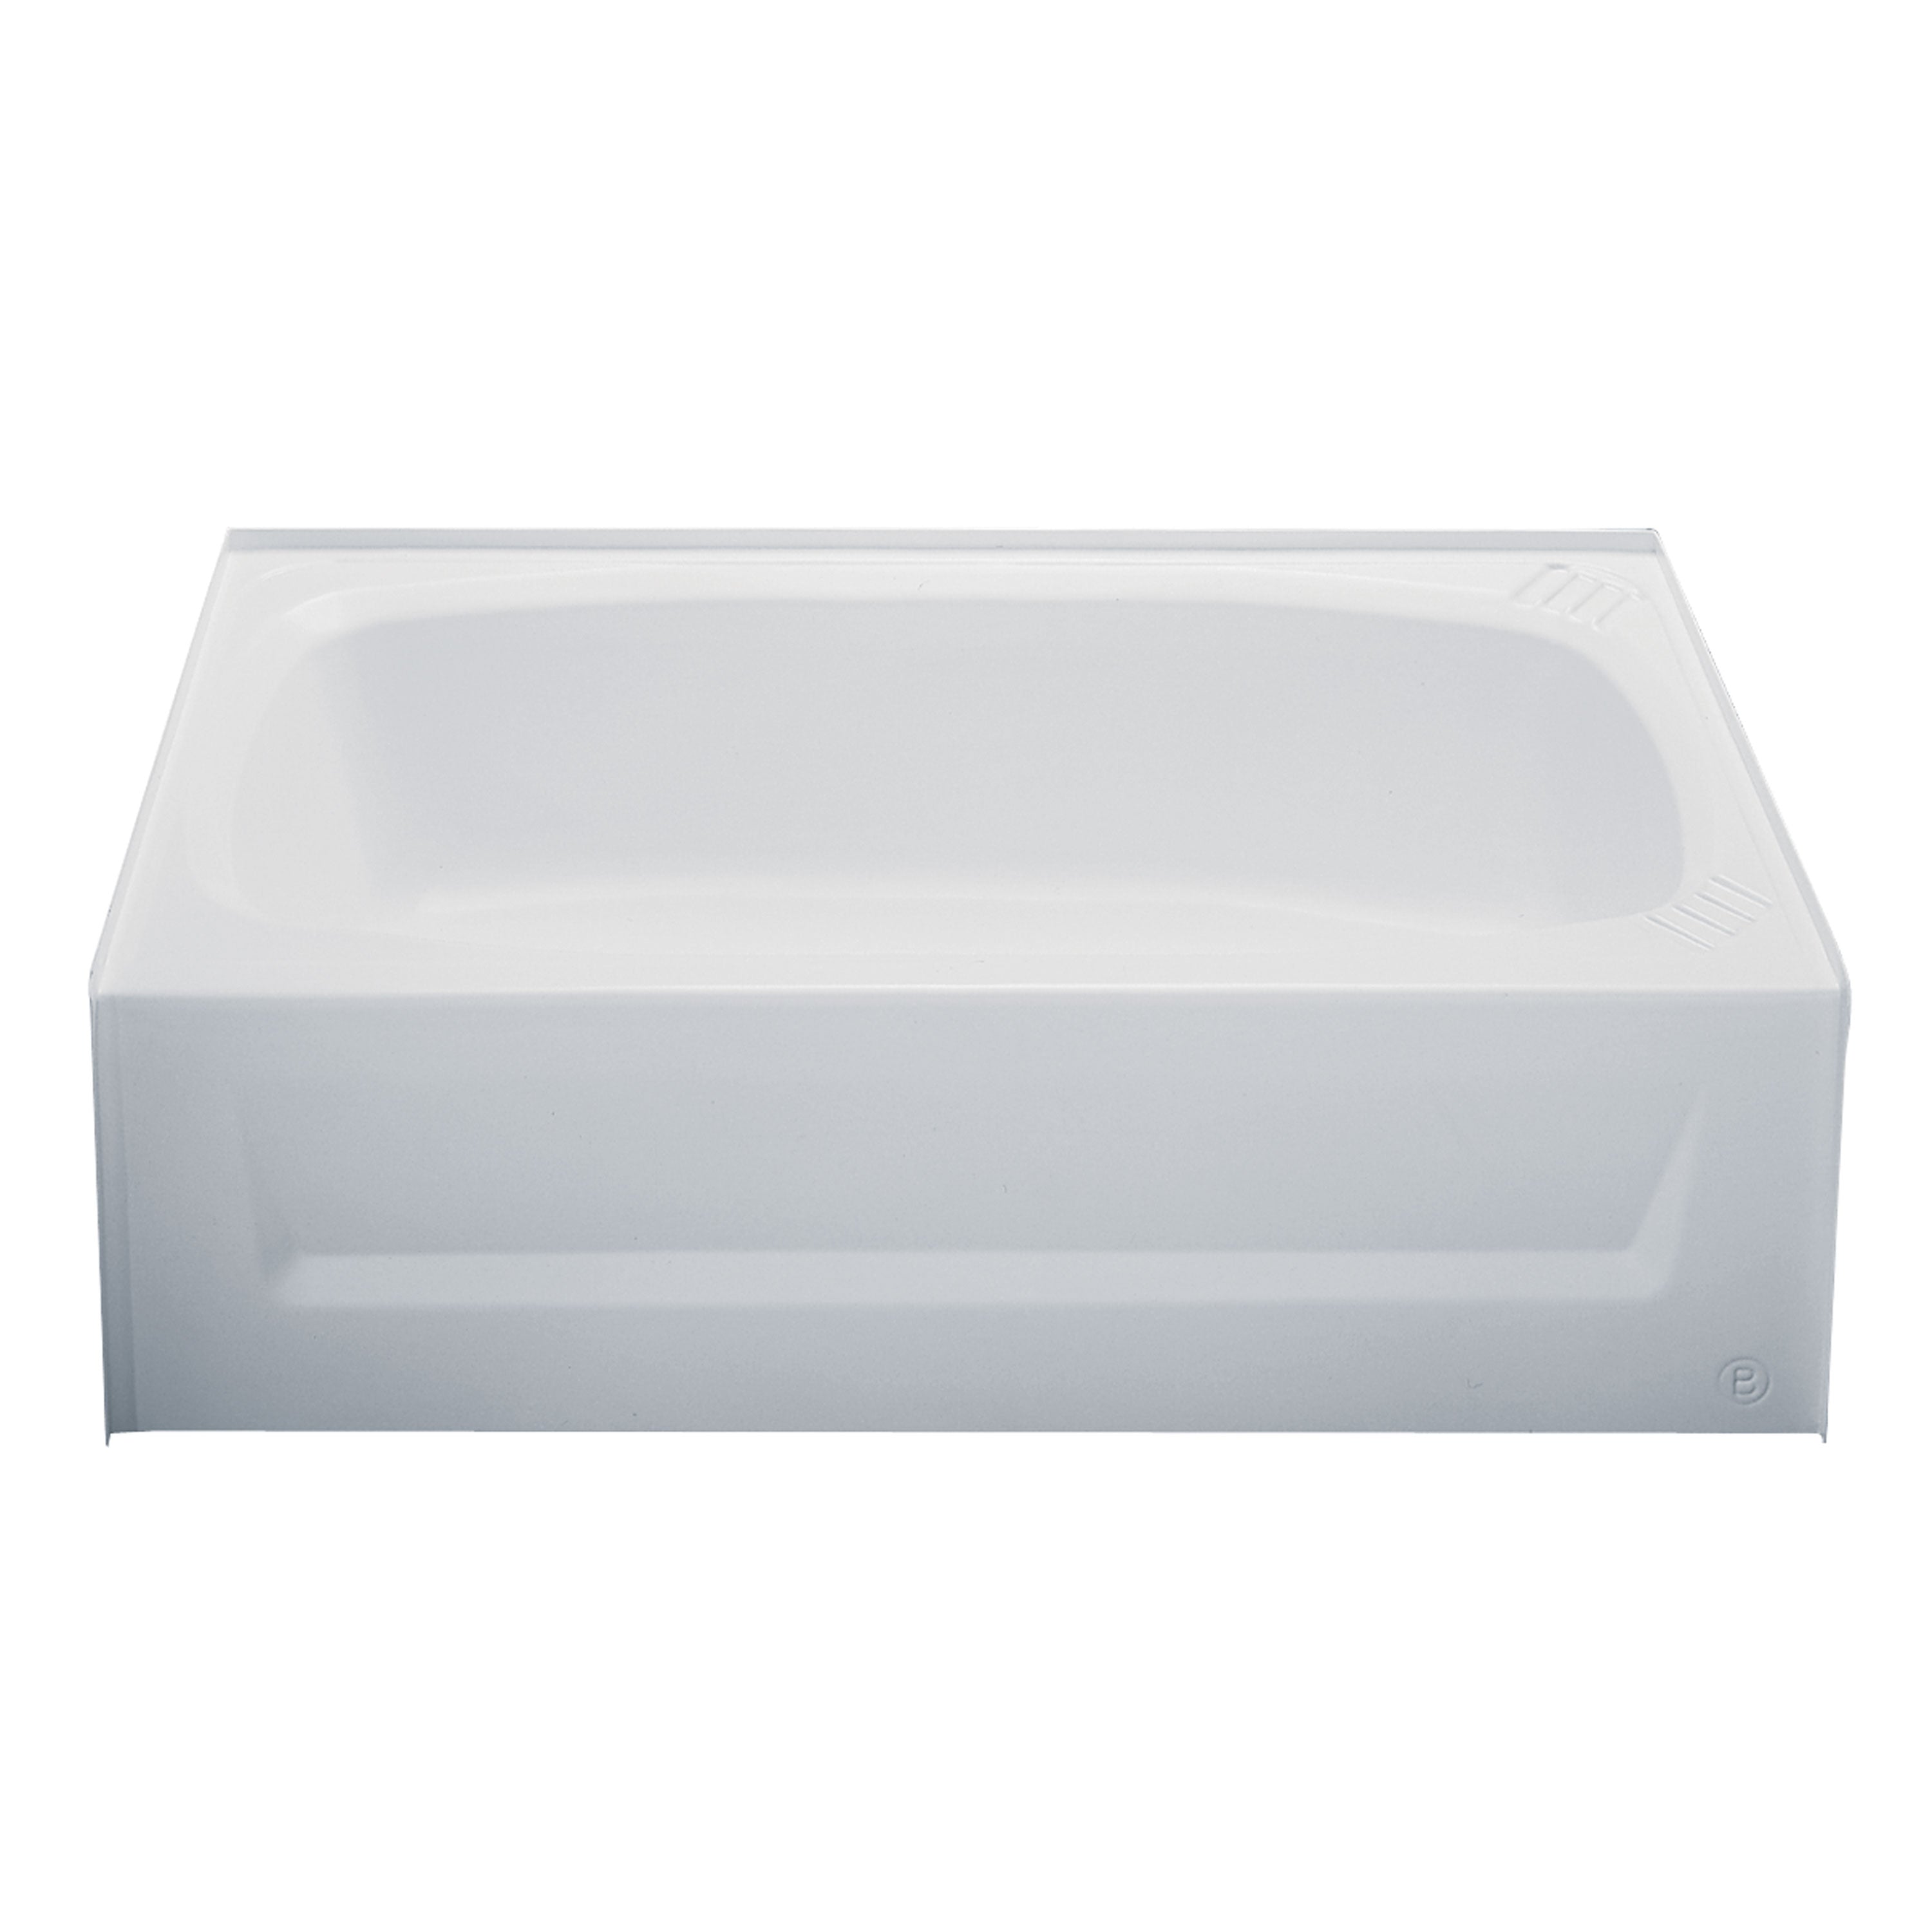 Kinro W2754A LH-SPK ABS Bath Tub with Apron - 27 in. x 54 in., Left Hand, White